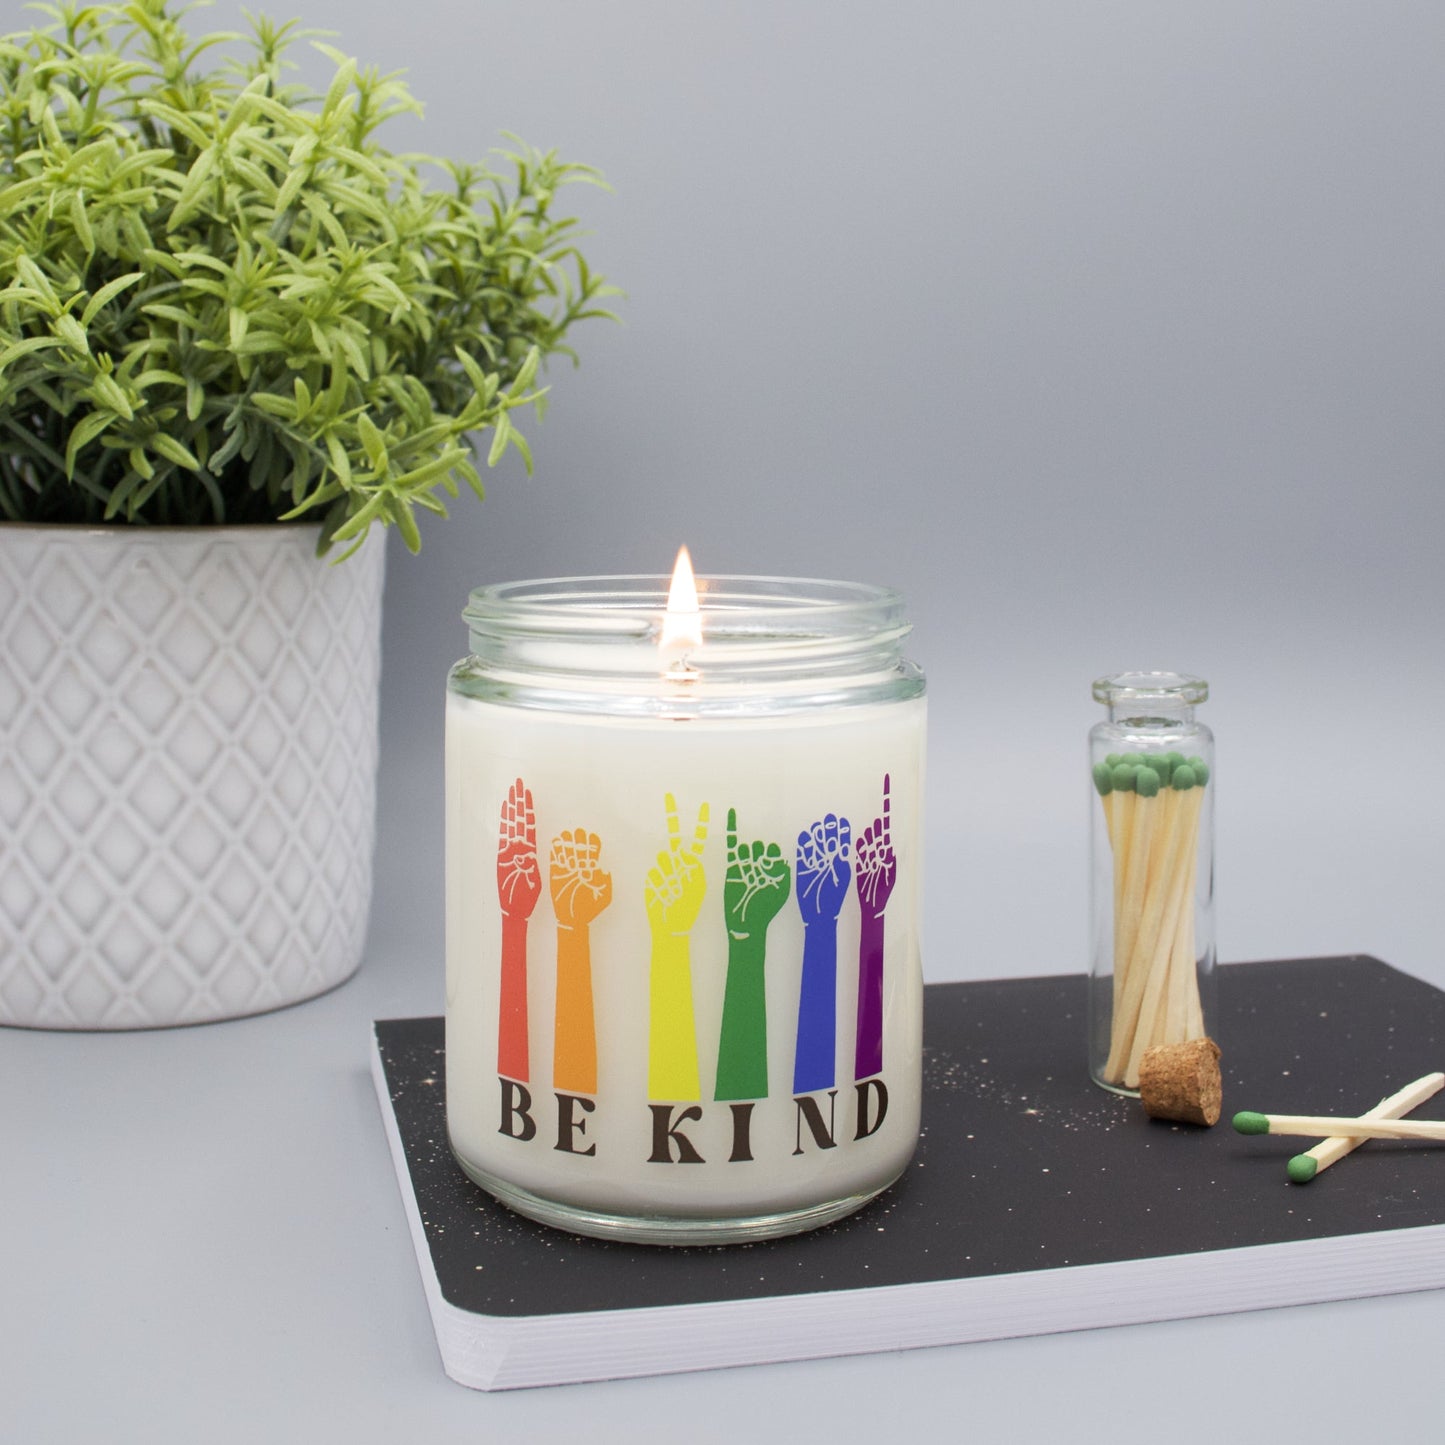 Be Kind - Scented Candle